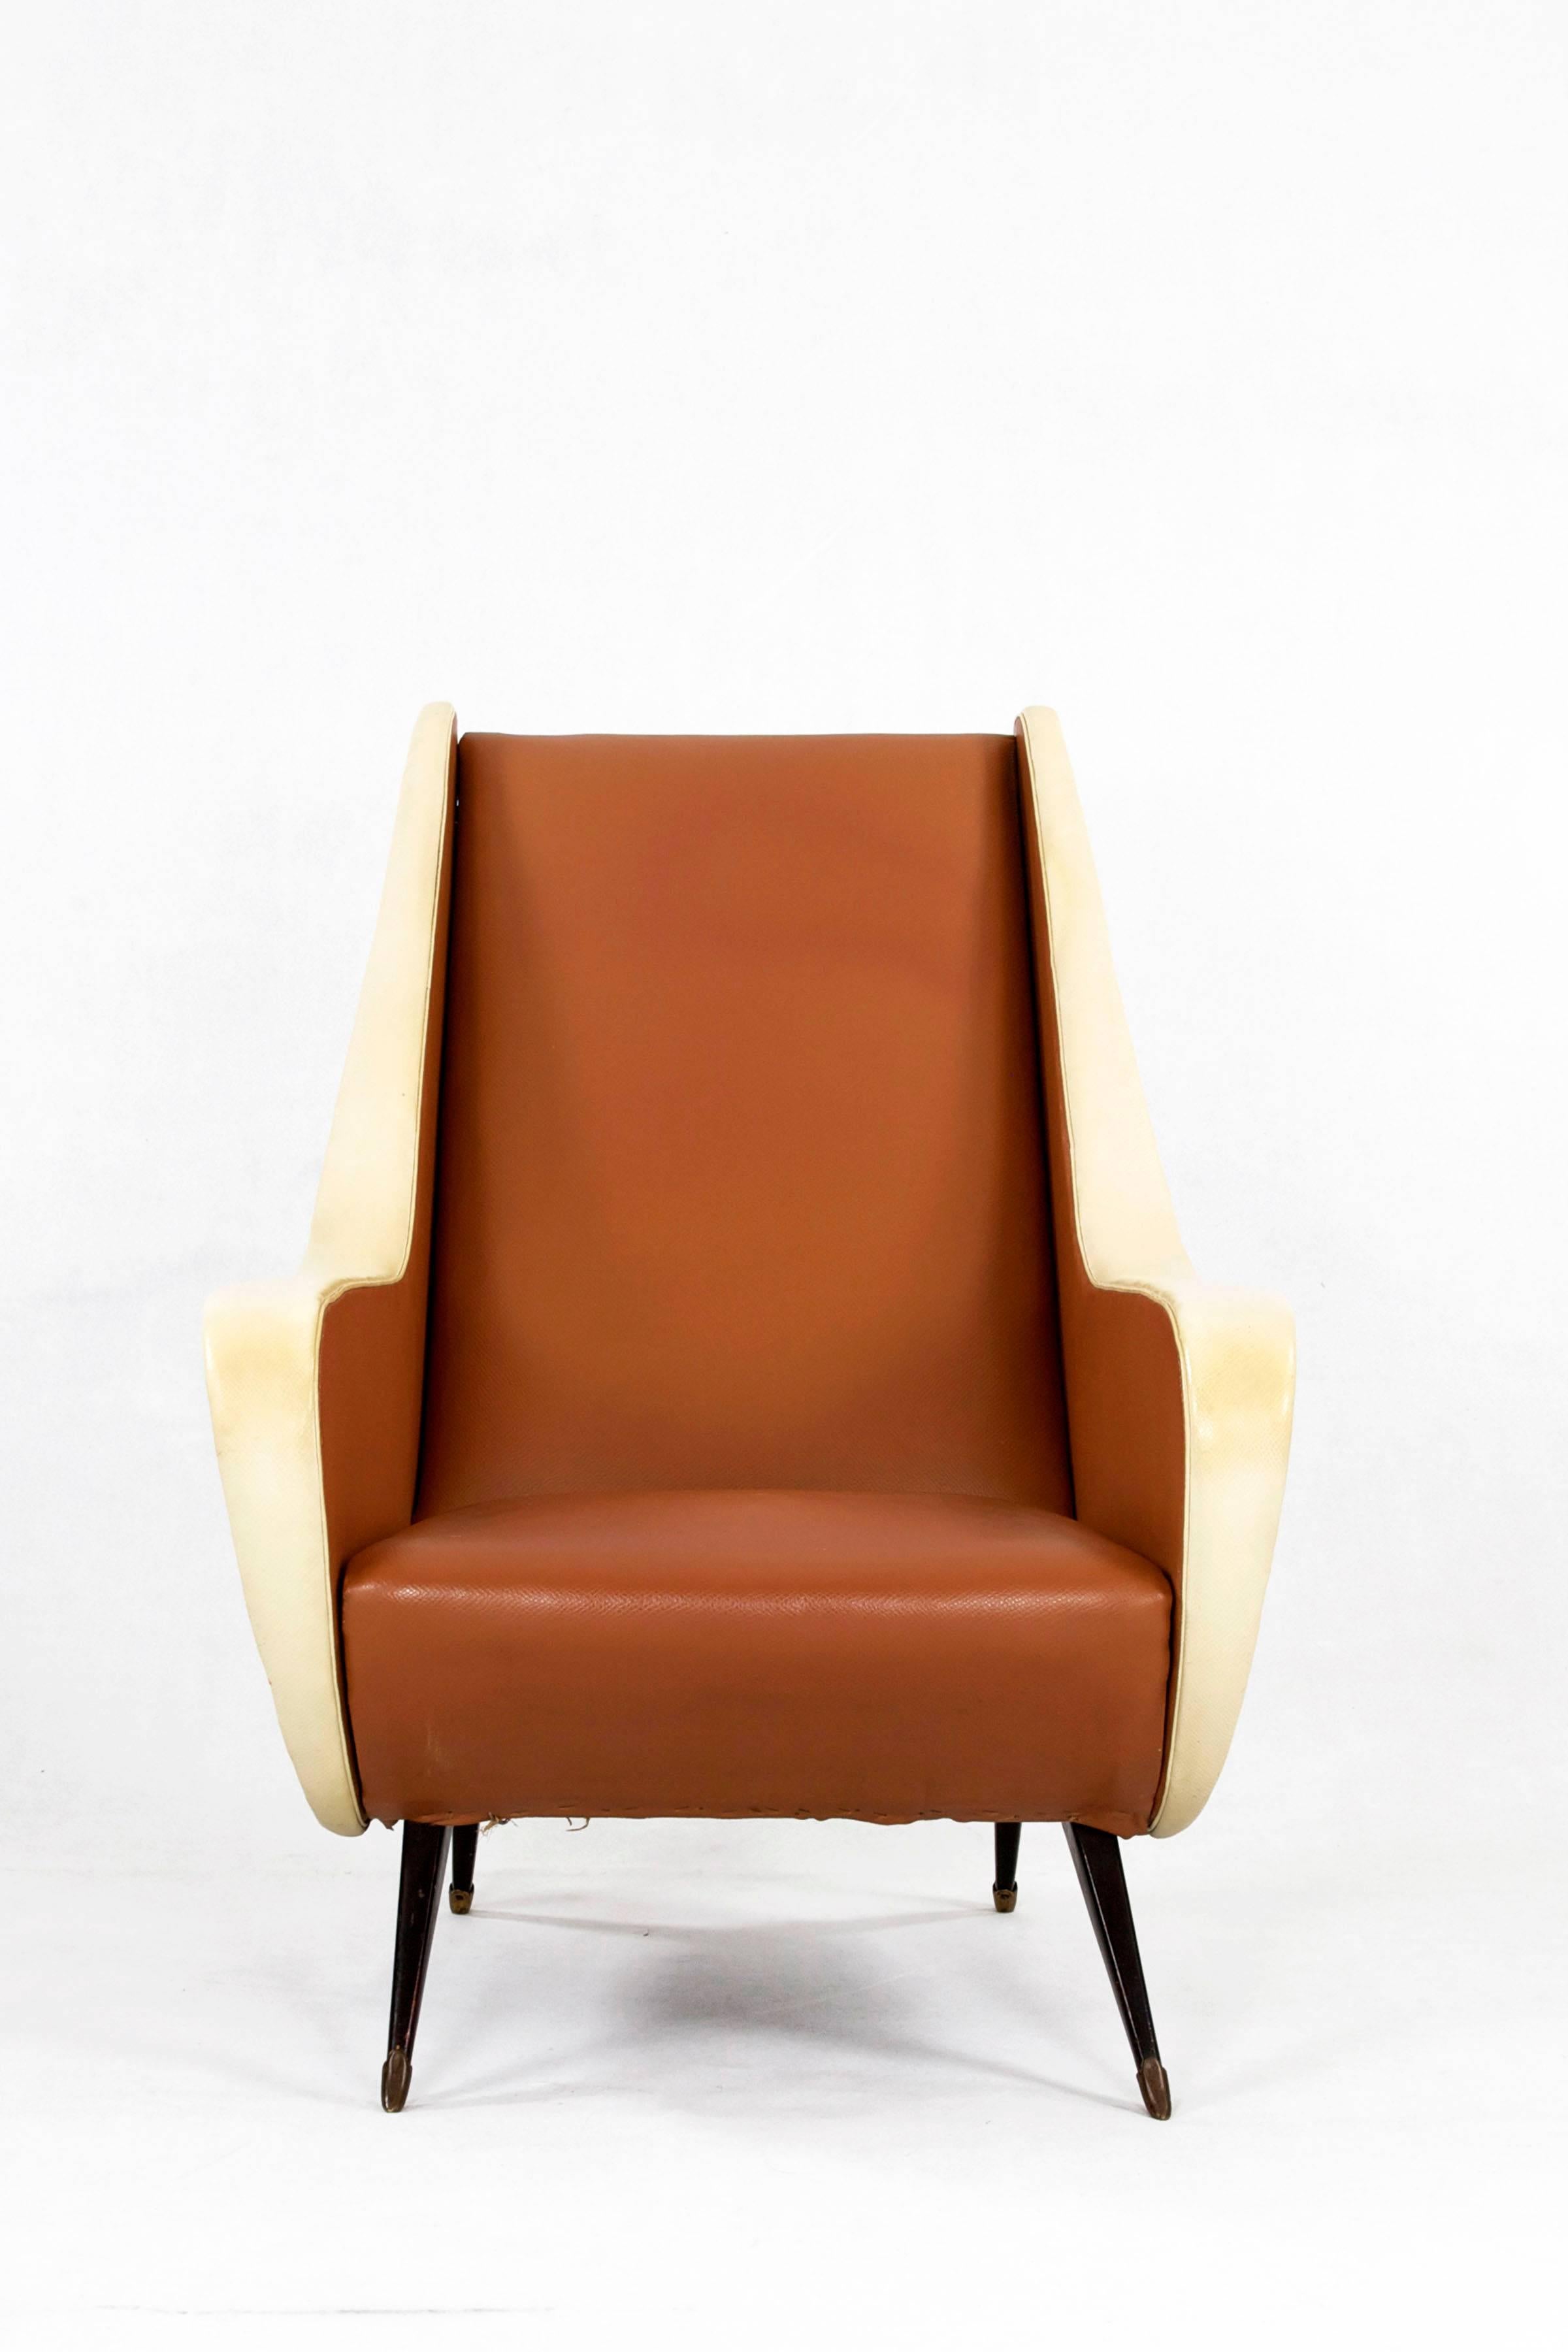 This Chair in two-tone look from Italy, 1950s features a comfortable seat and rest in elegant rounded shapes as well as tapered legs. The chairs cover is faux leather in original condition.

Feel free to contact us for more detailed pictures. 